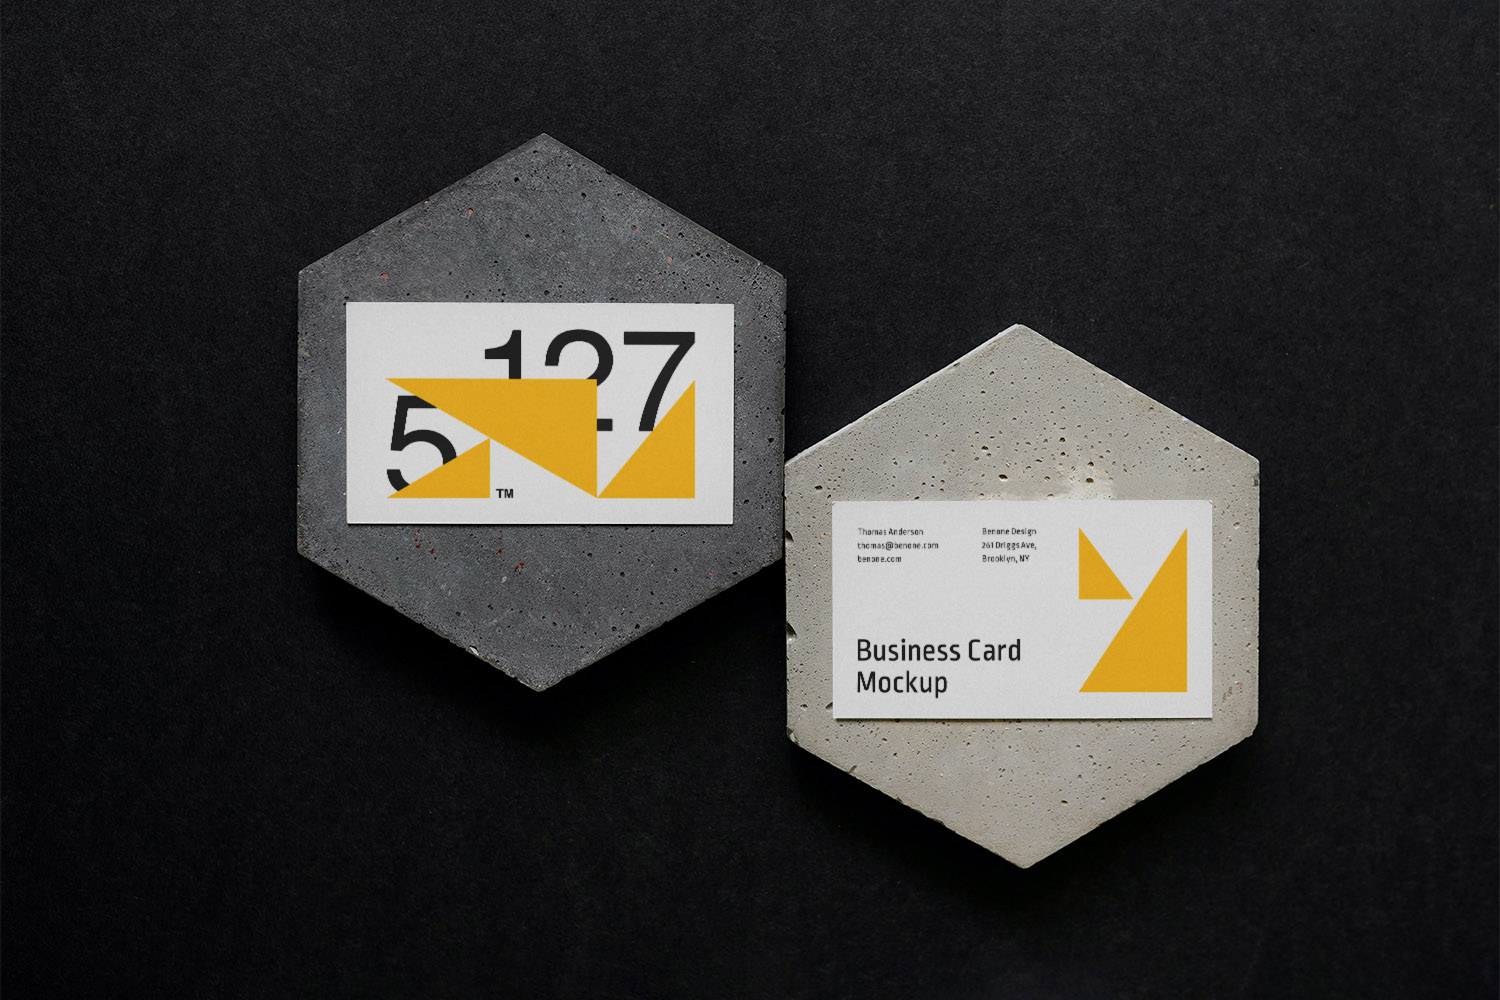 Two Business Cards on a Concreate Mockup